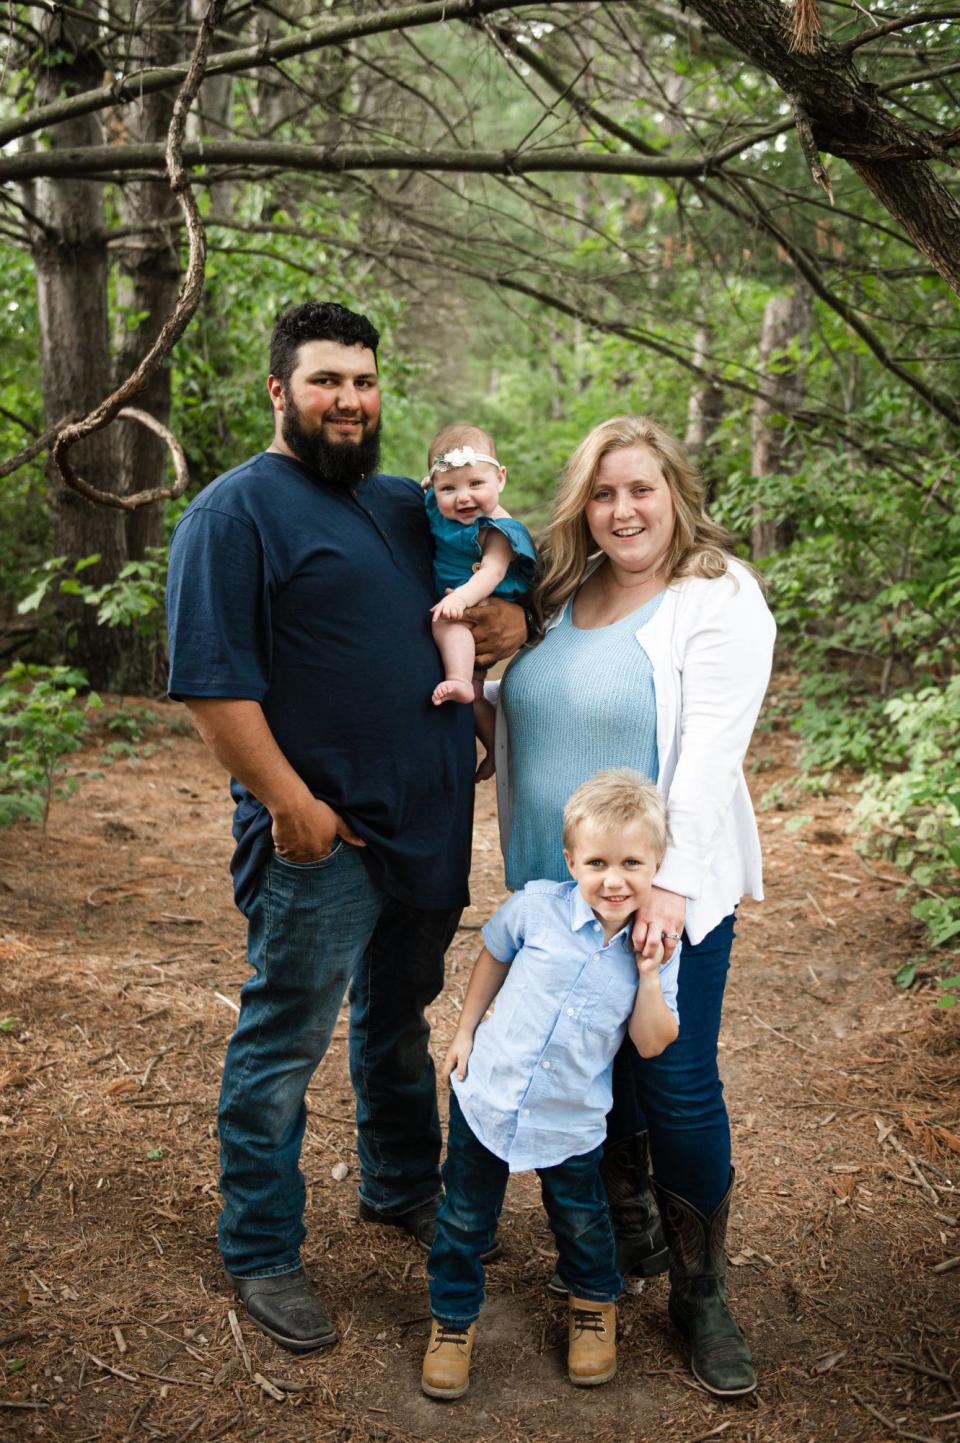 Lacey Pfeiffer, right, the new manager of Potawatomi Wildlife Park in Bourbon, stands with her family along one of the trails. At left is her husband, Kevin, holding their daughter, Lux. Their son is Kruz.